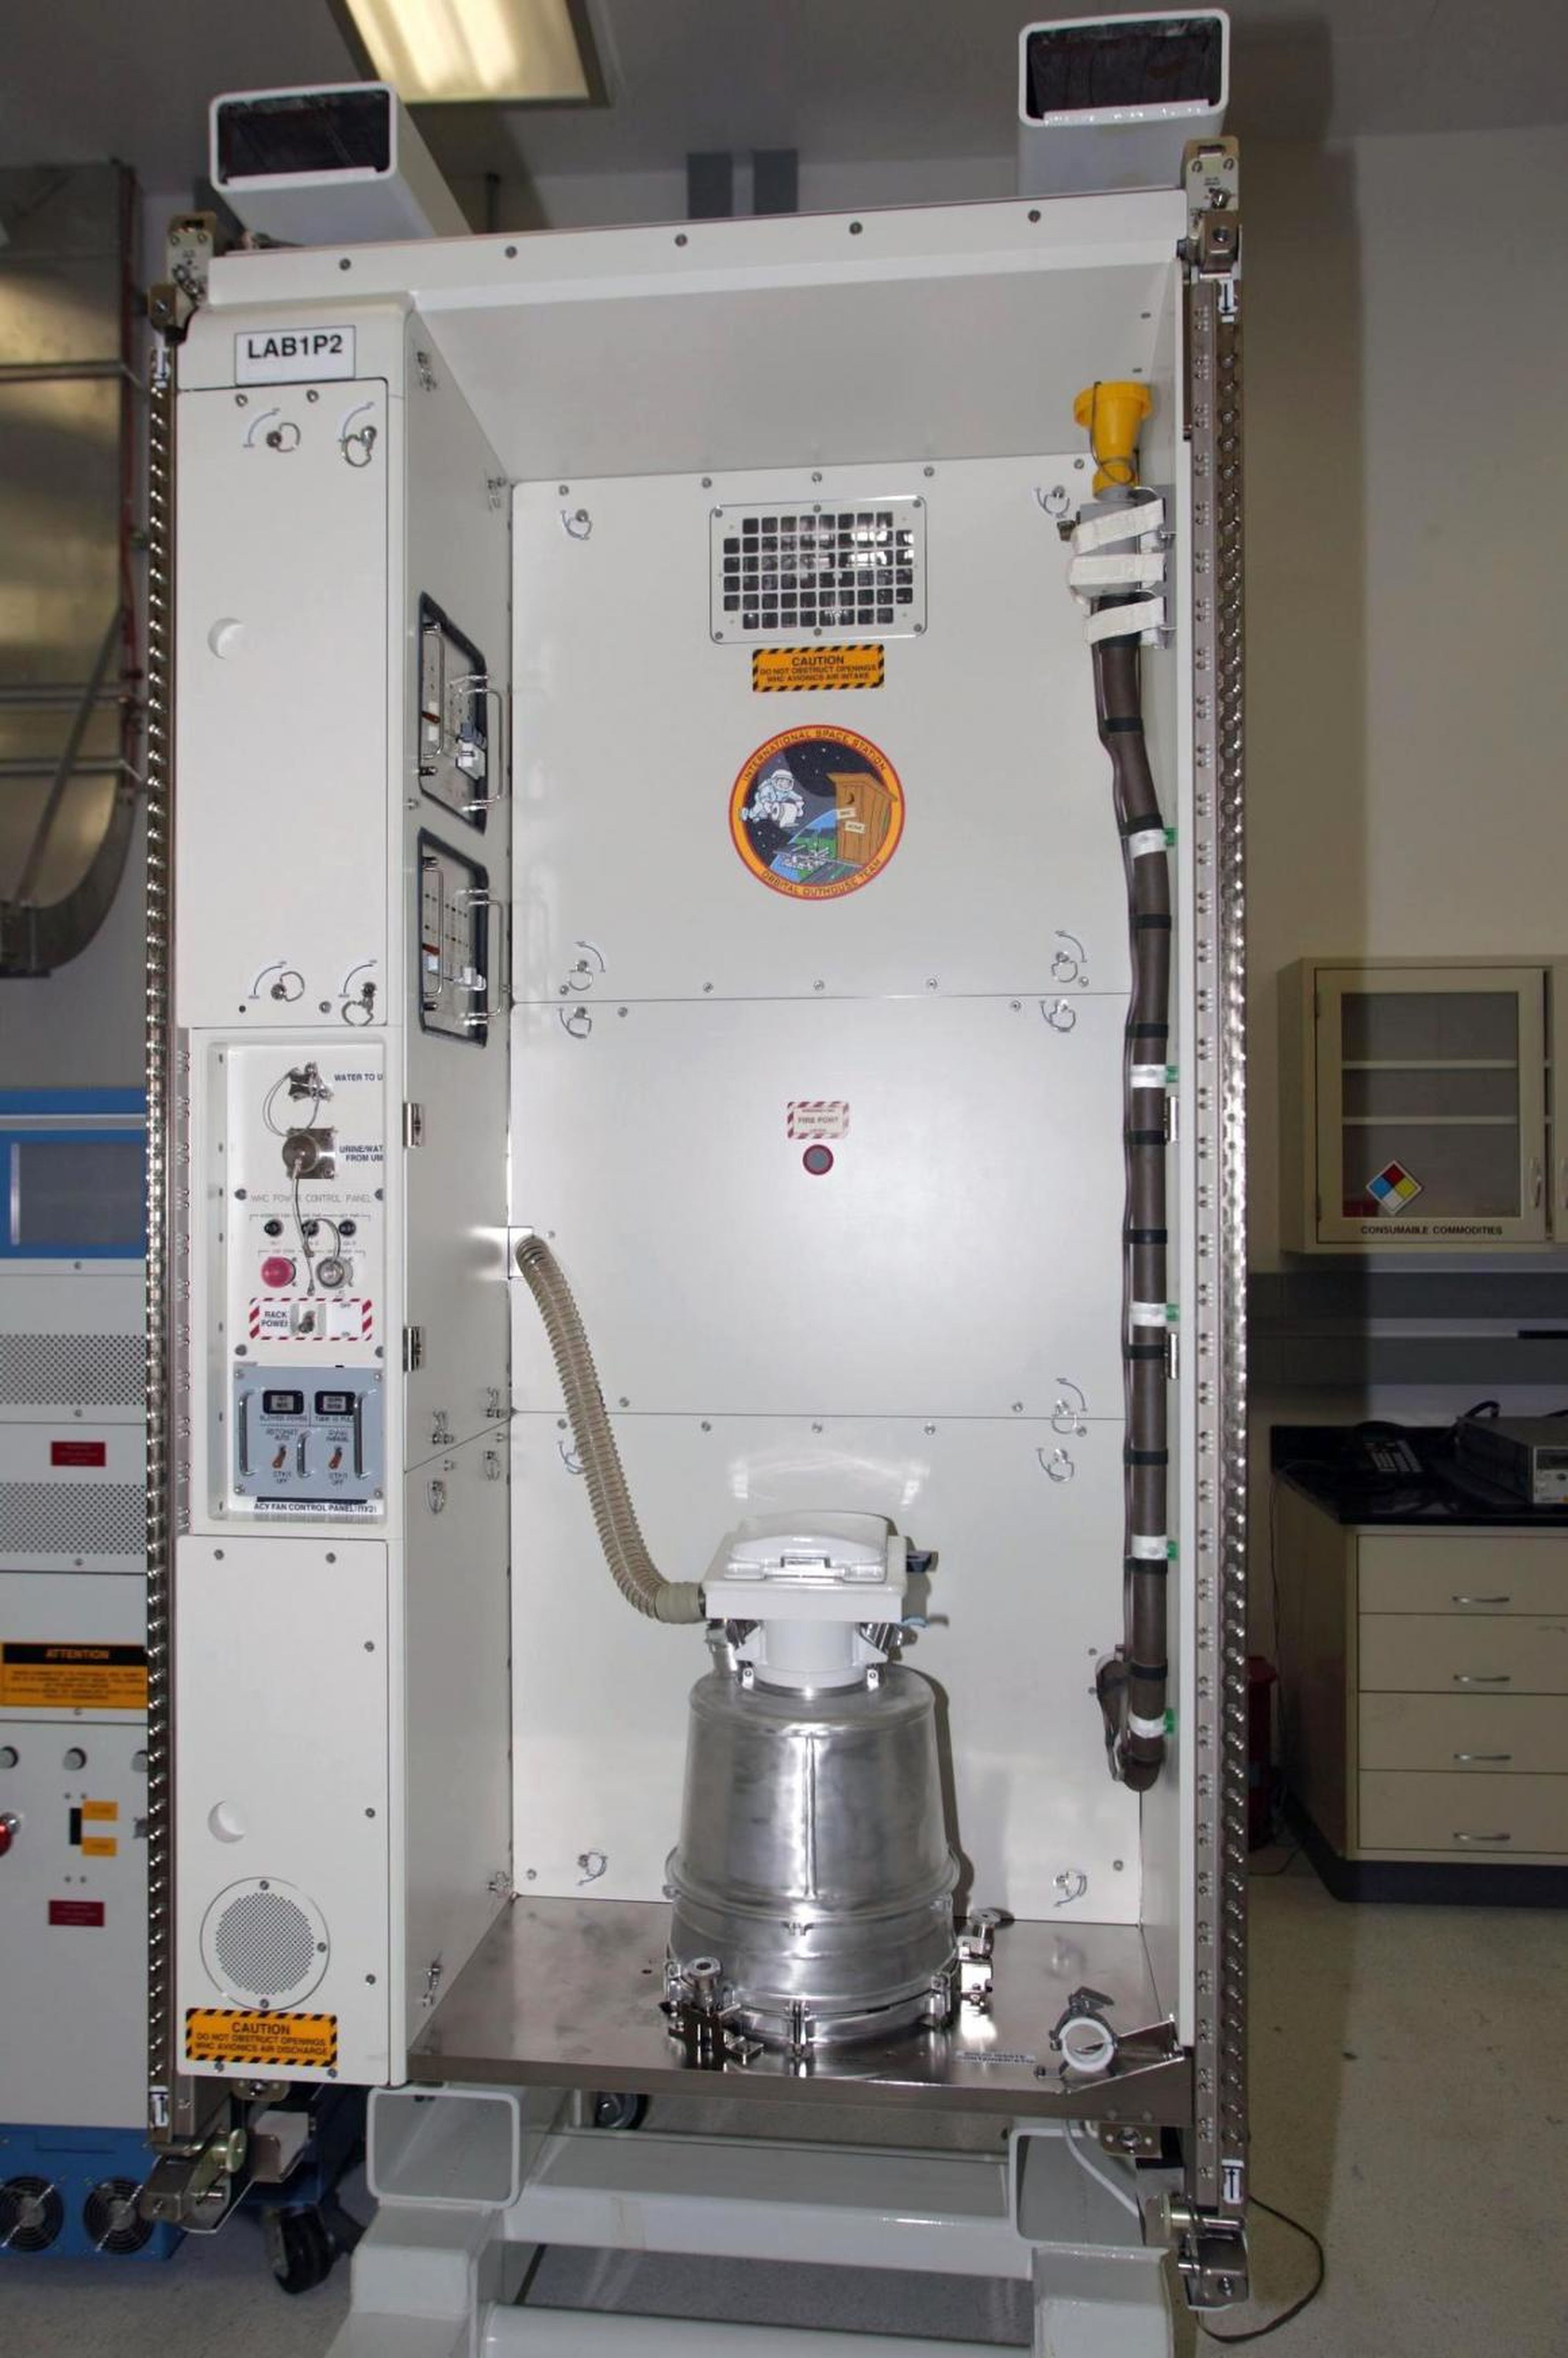 This waste and hygiene compartment was delivered to the International Space Station aboard space shuttle Endeavour. The Russian-built system separately channels liquid and solid waste.